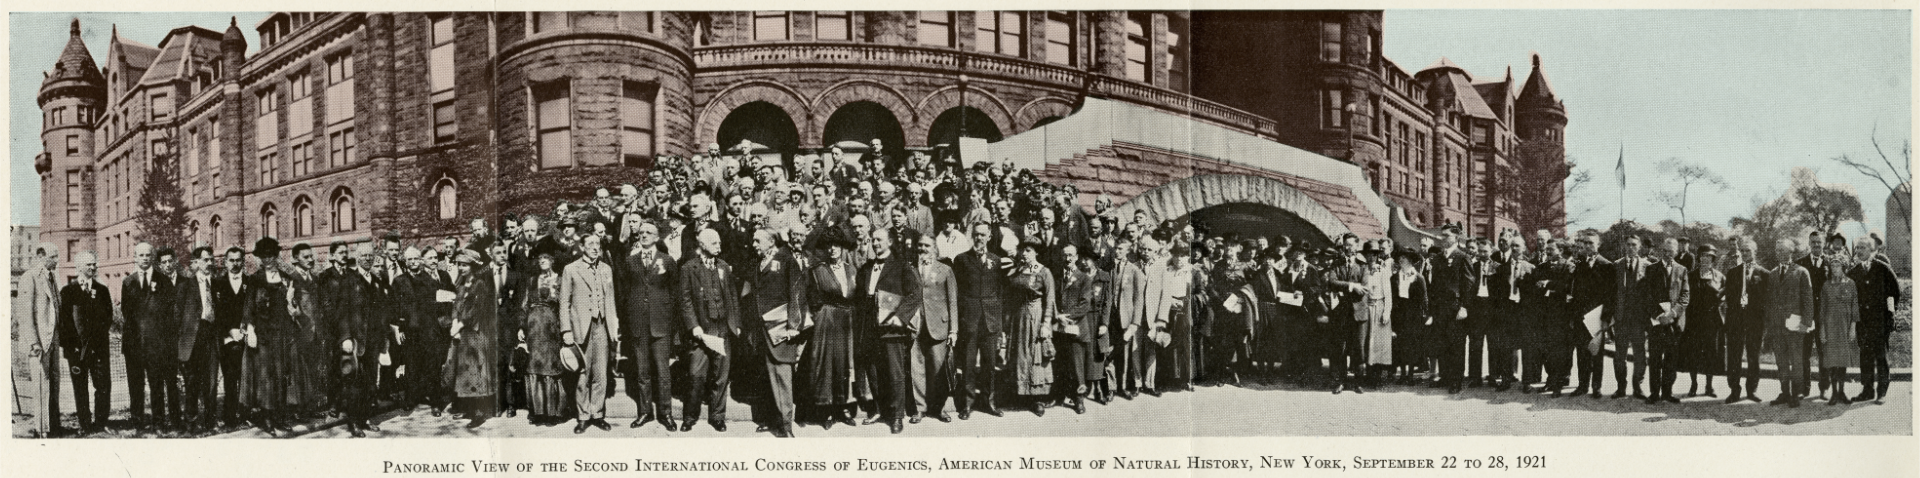 A partially colorized panoramic photo of participants of the Second International Congress of Eugenics posing in front of the American Museum of Natural History building. In the picture, the building is colorized in light brown shade and the participants are in black and white. There are 151 people in the photo whom are mostly men with some women also visible. All participants are well-dressed in the fashion of that era. The caption of the photo reads “Panramic View of the Second International Congress of Eugenics, American Museum of Natural History, New York, September 22 to 28, 2921”.